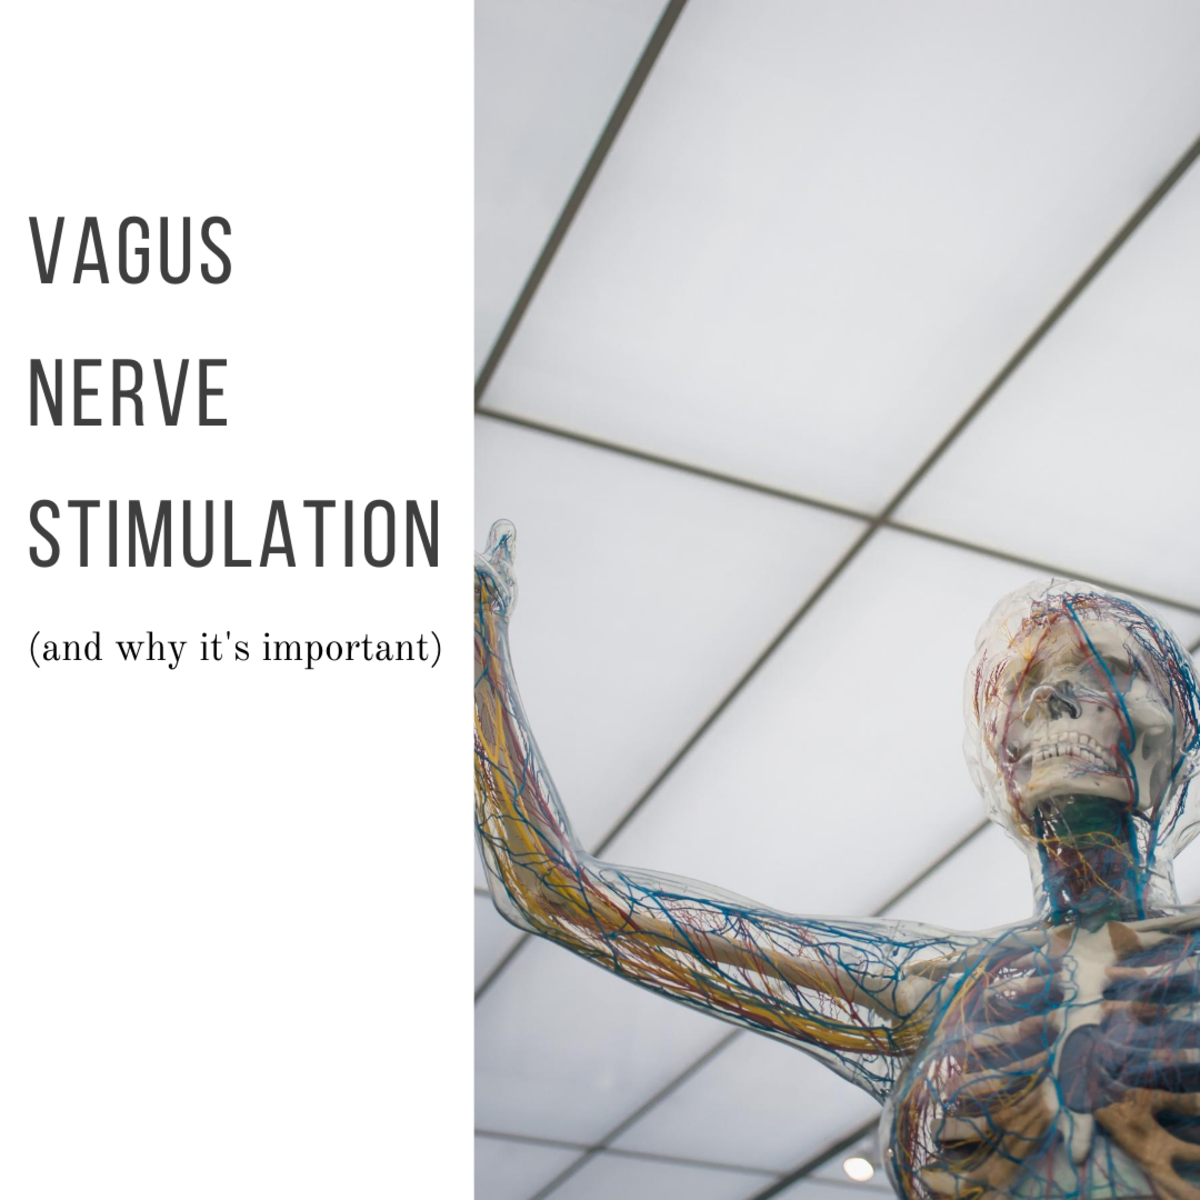 Vagus Nerve Stimulation: Why It's Vital for Your Health